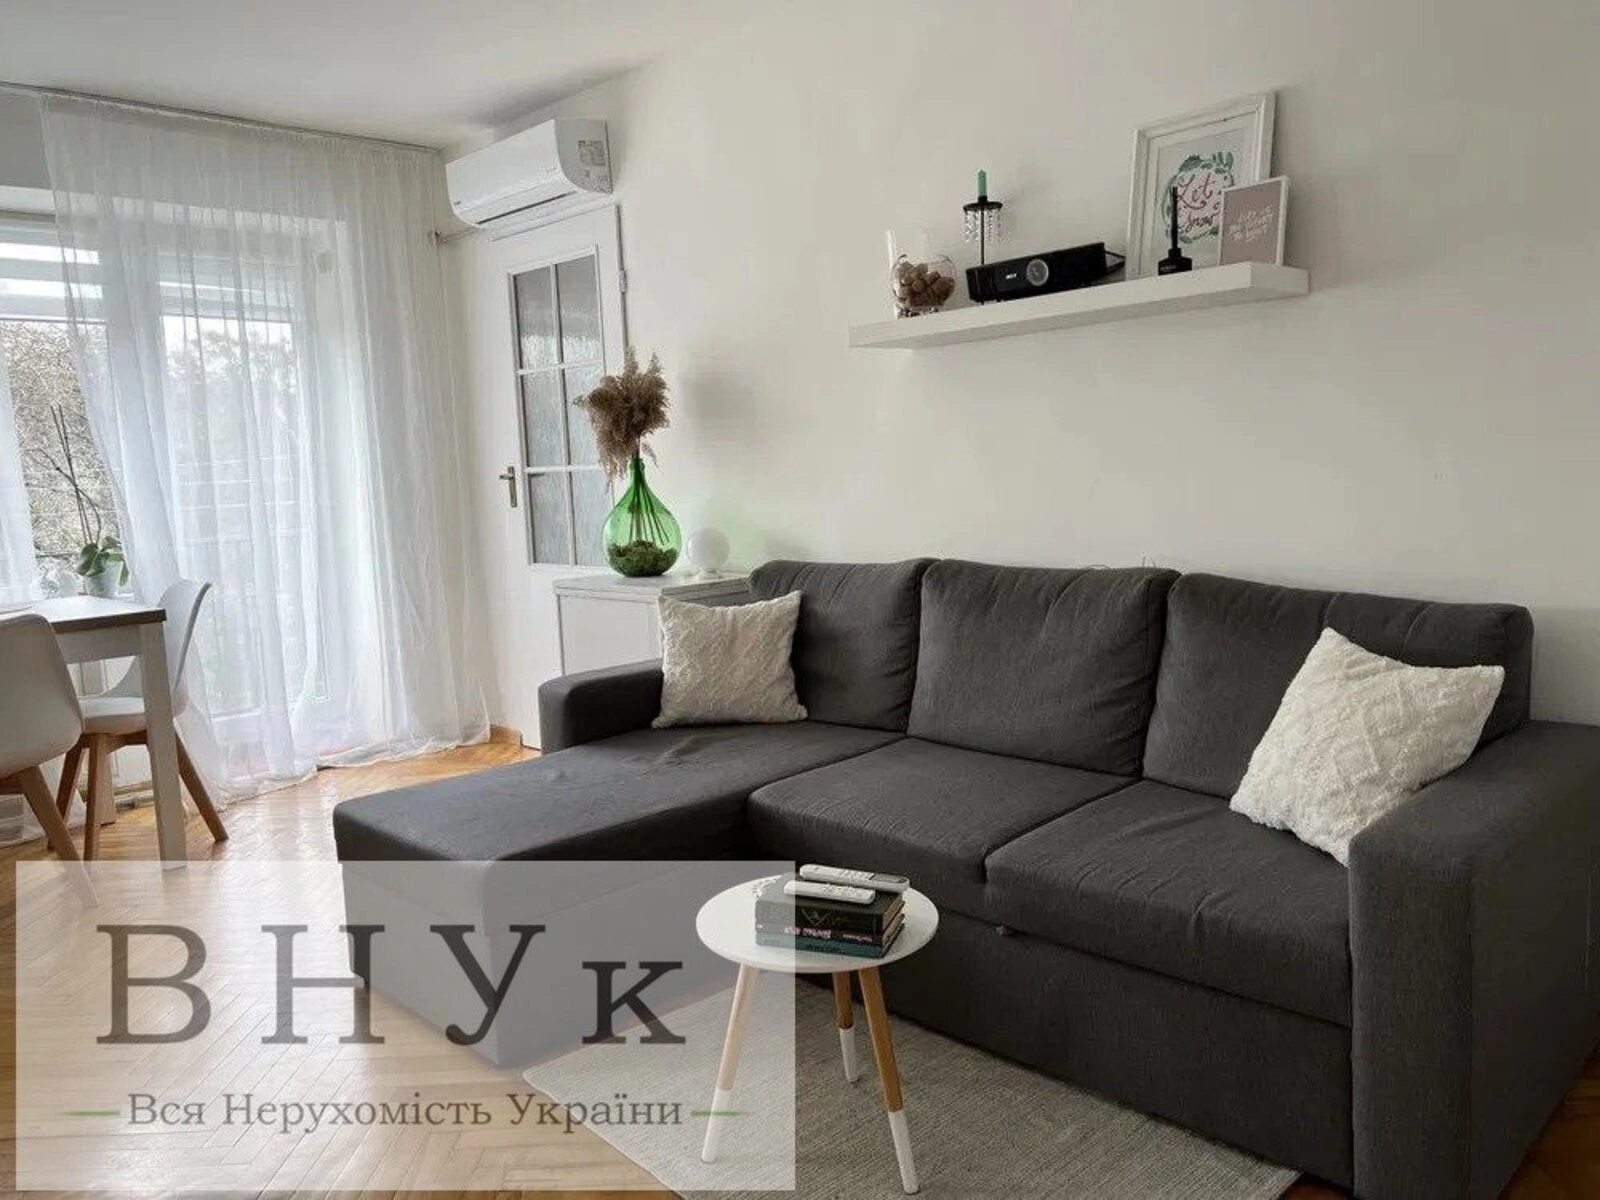 Apartments for sale. 3 rooms, 43 m², 2nd floor/2 floors. Lychakivskyy rayon, Lviv. 